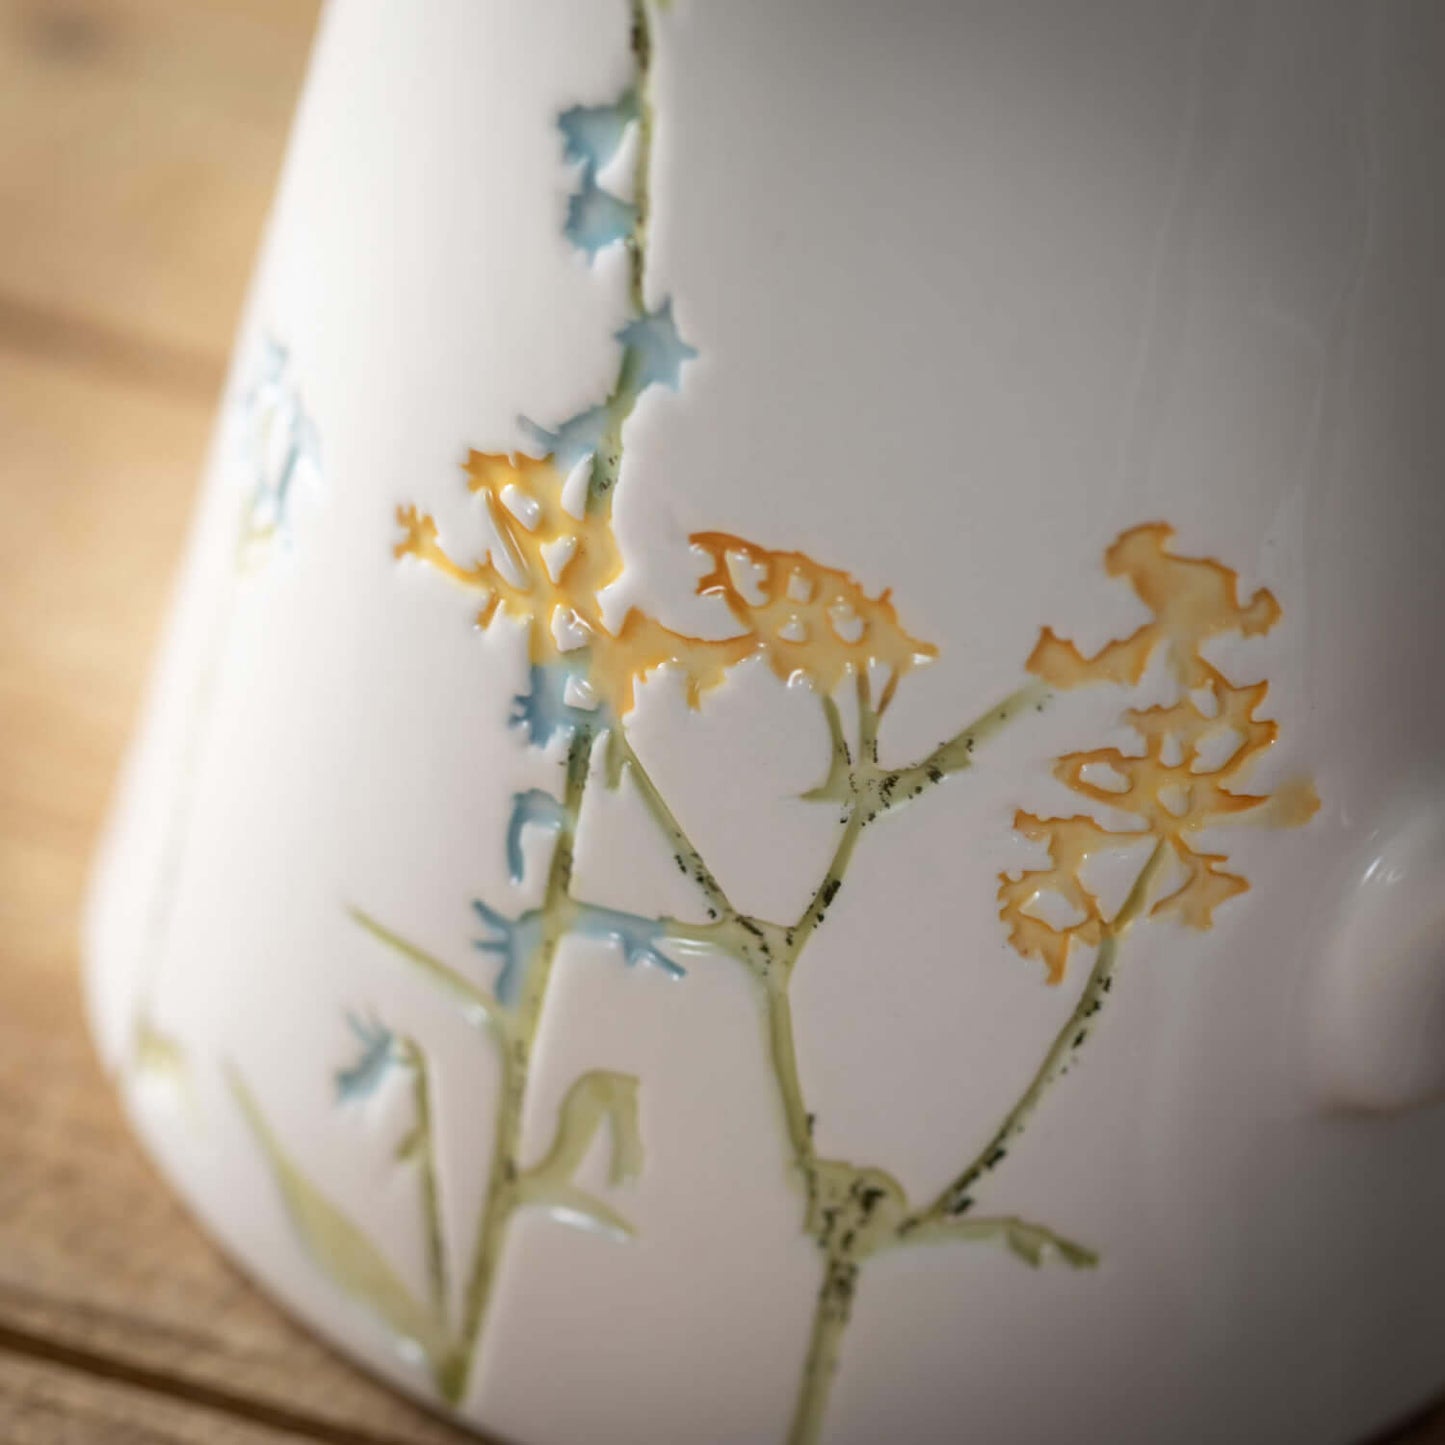 Herb Imprinted Pitcher